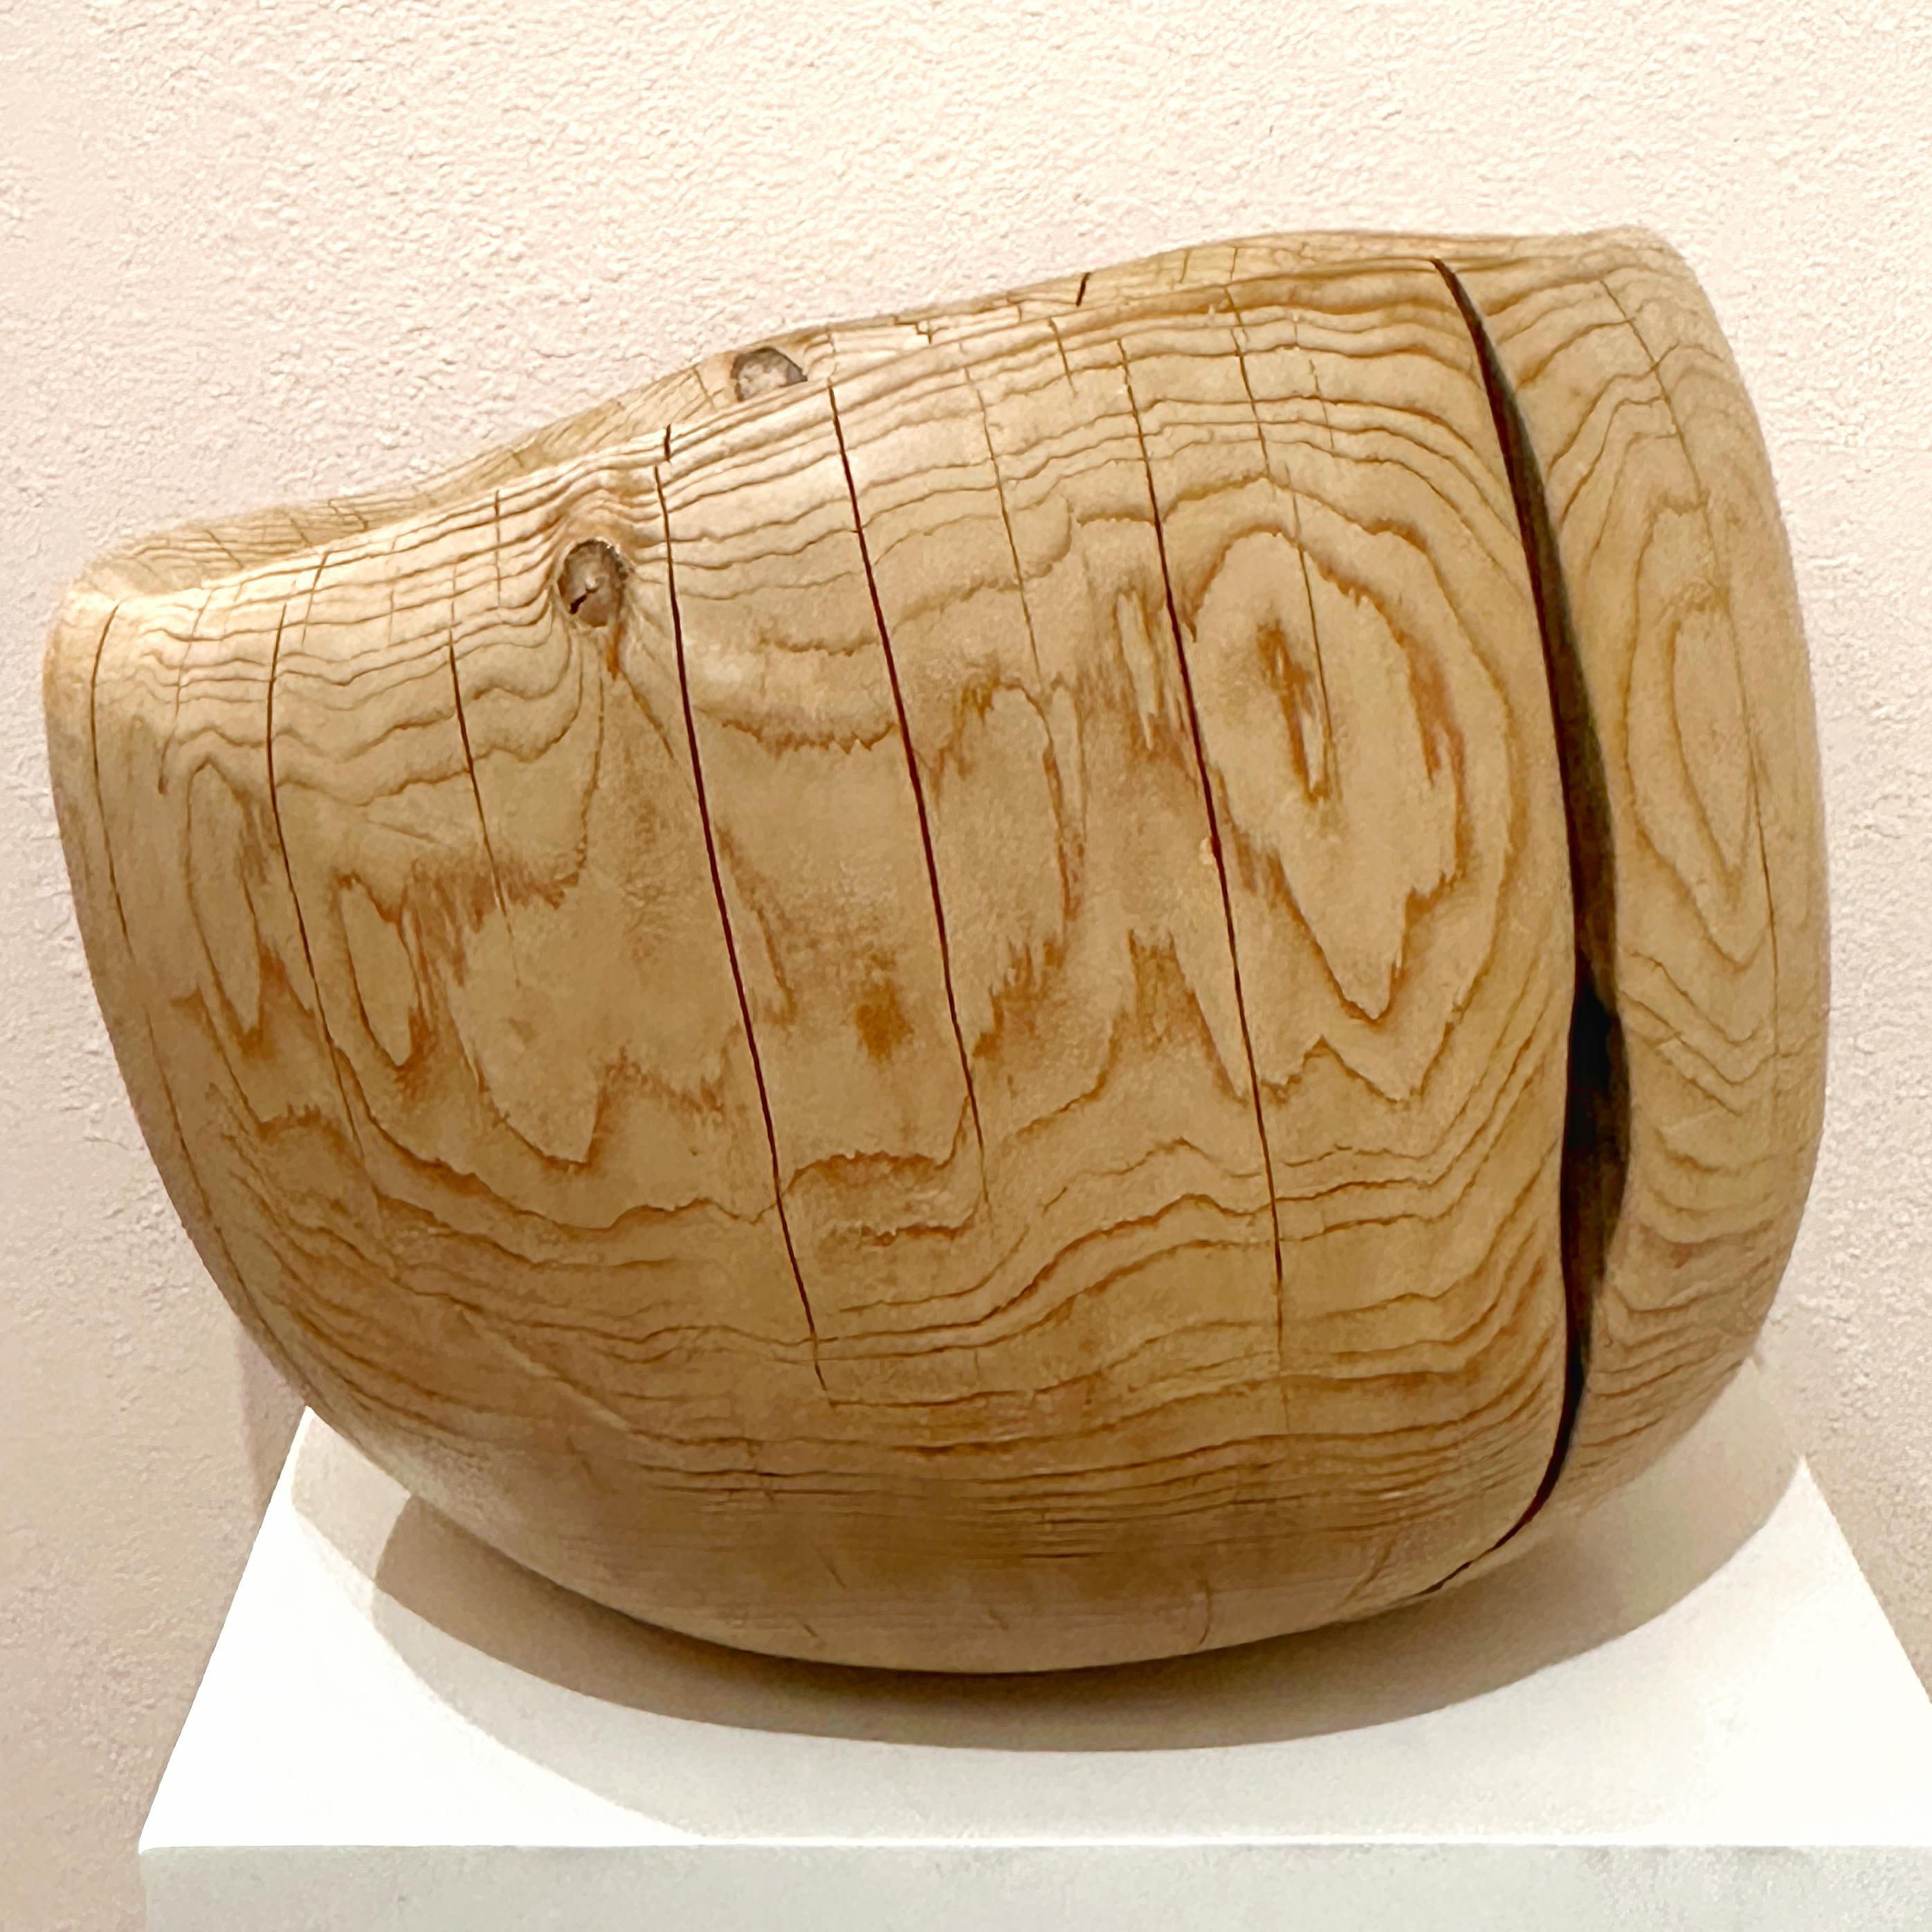 Hand-Carved Daniel Pollock Organic Modern Carved Pine Wood Stool or Sculptural Object, 1995 For Sale